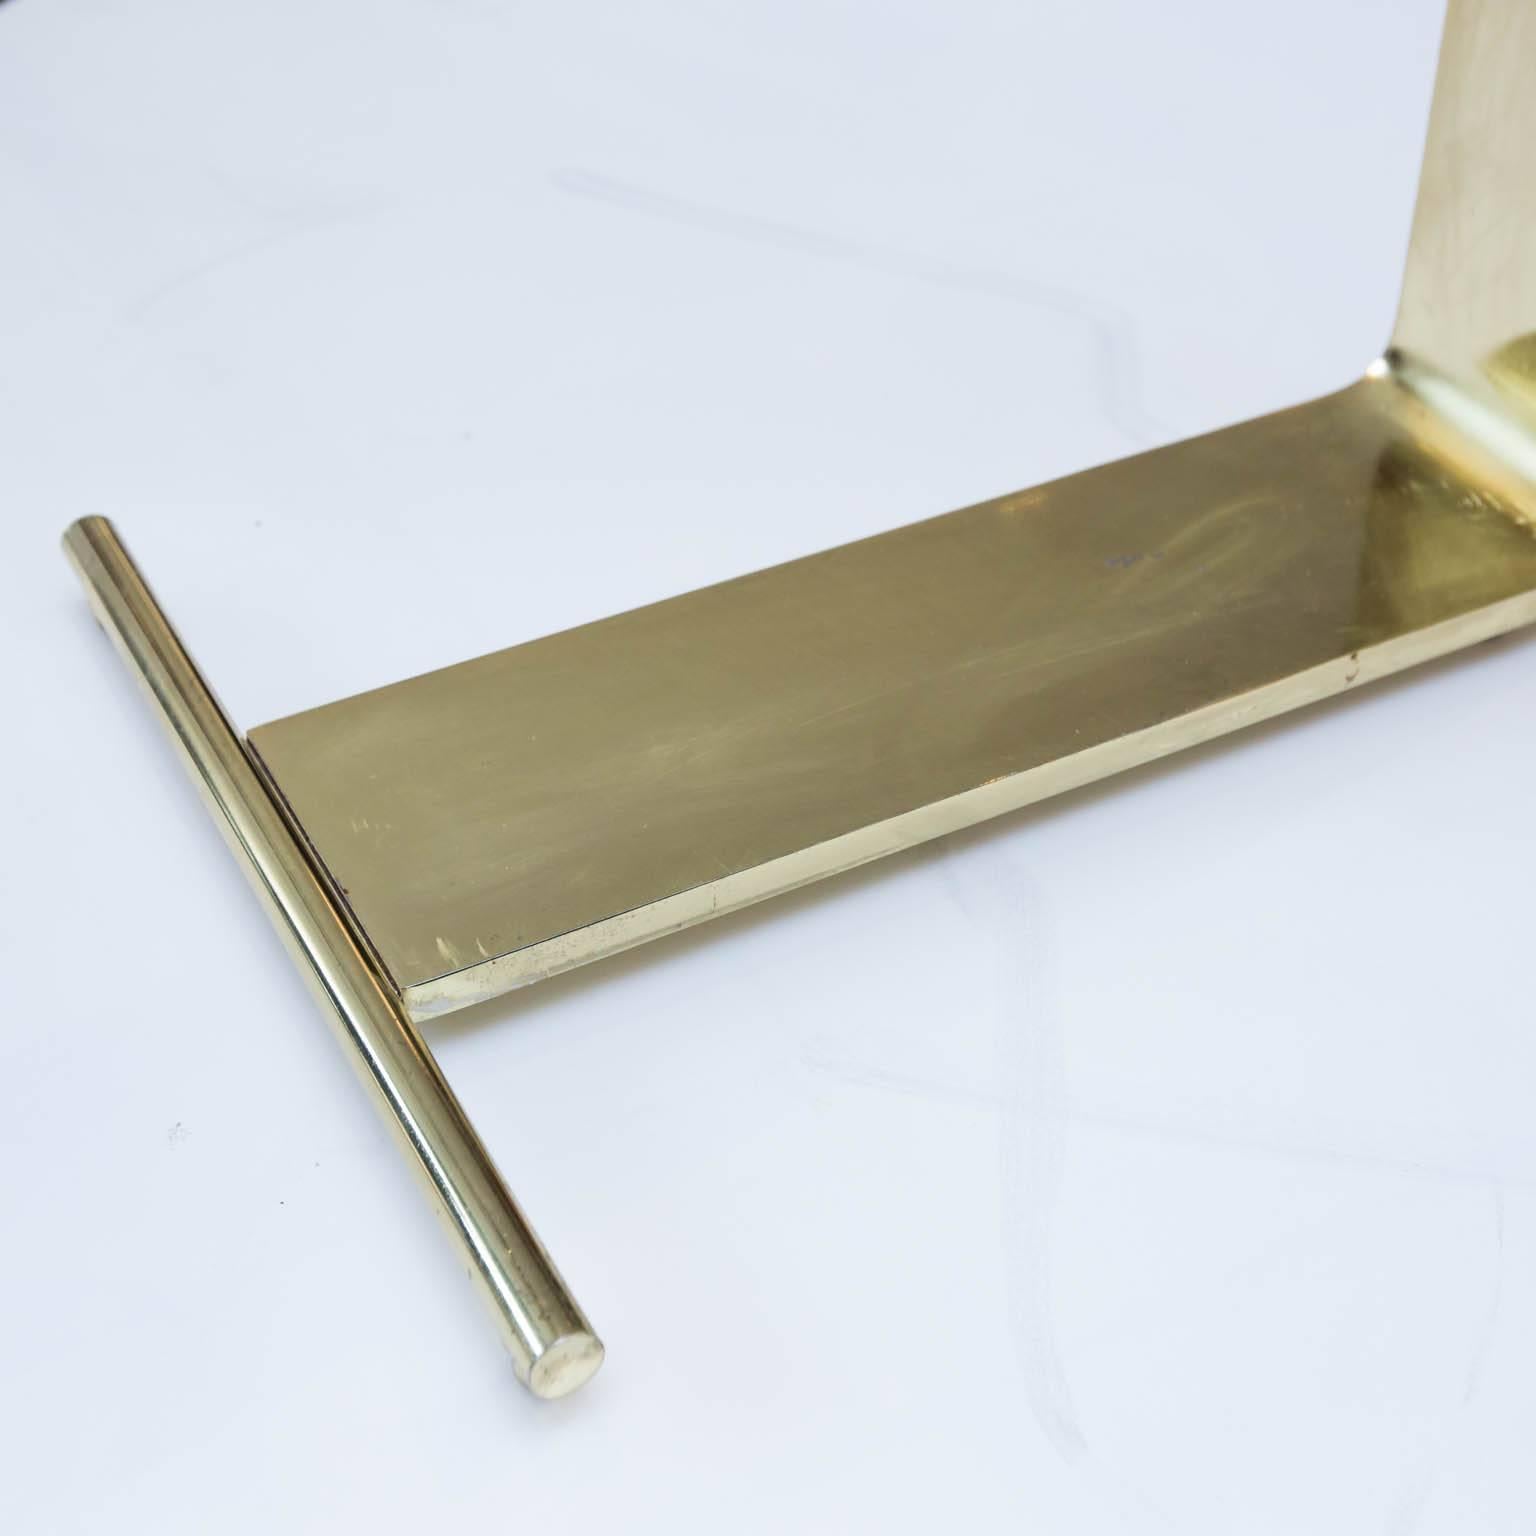 DIA brass and glass cantilevered table. Glass is 1/2